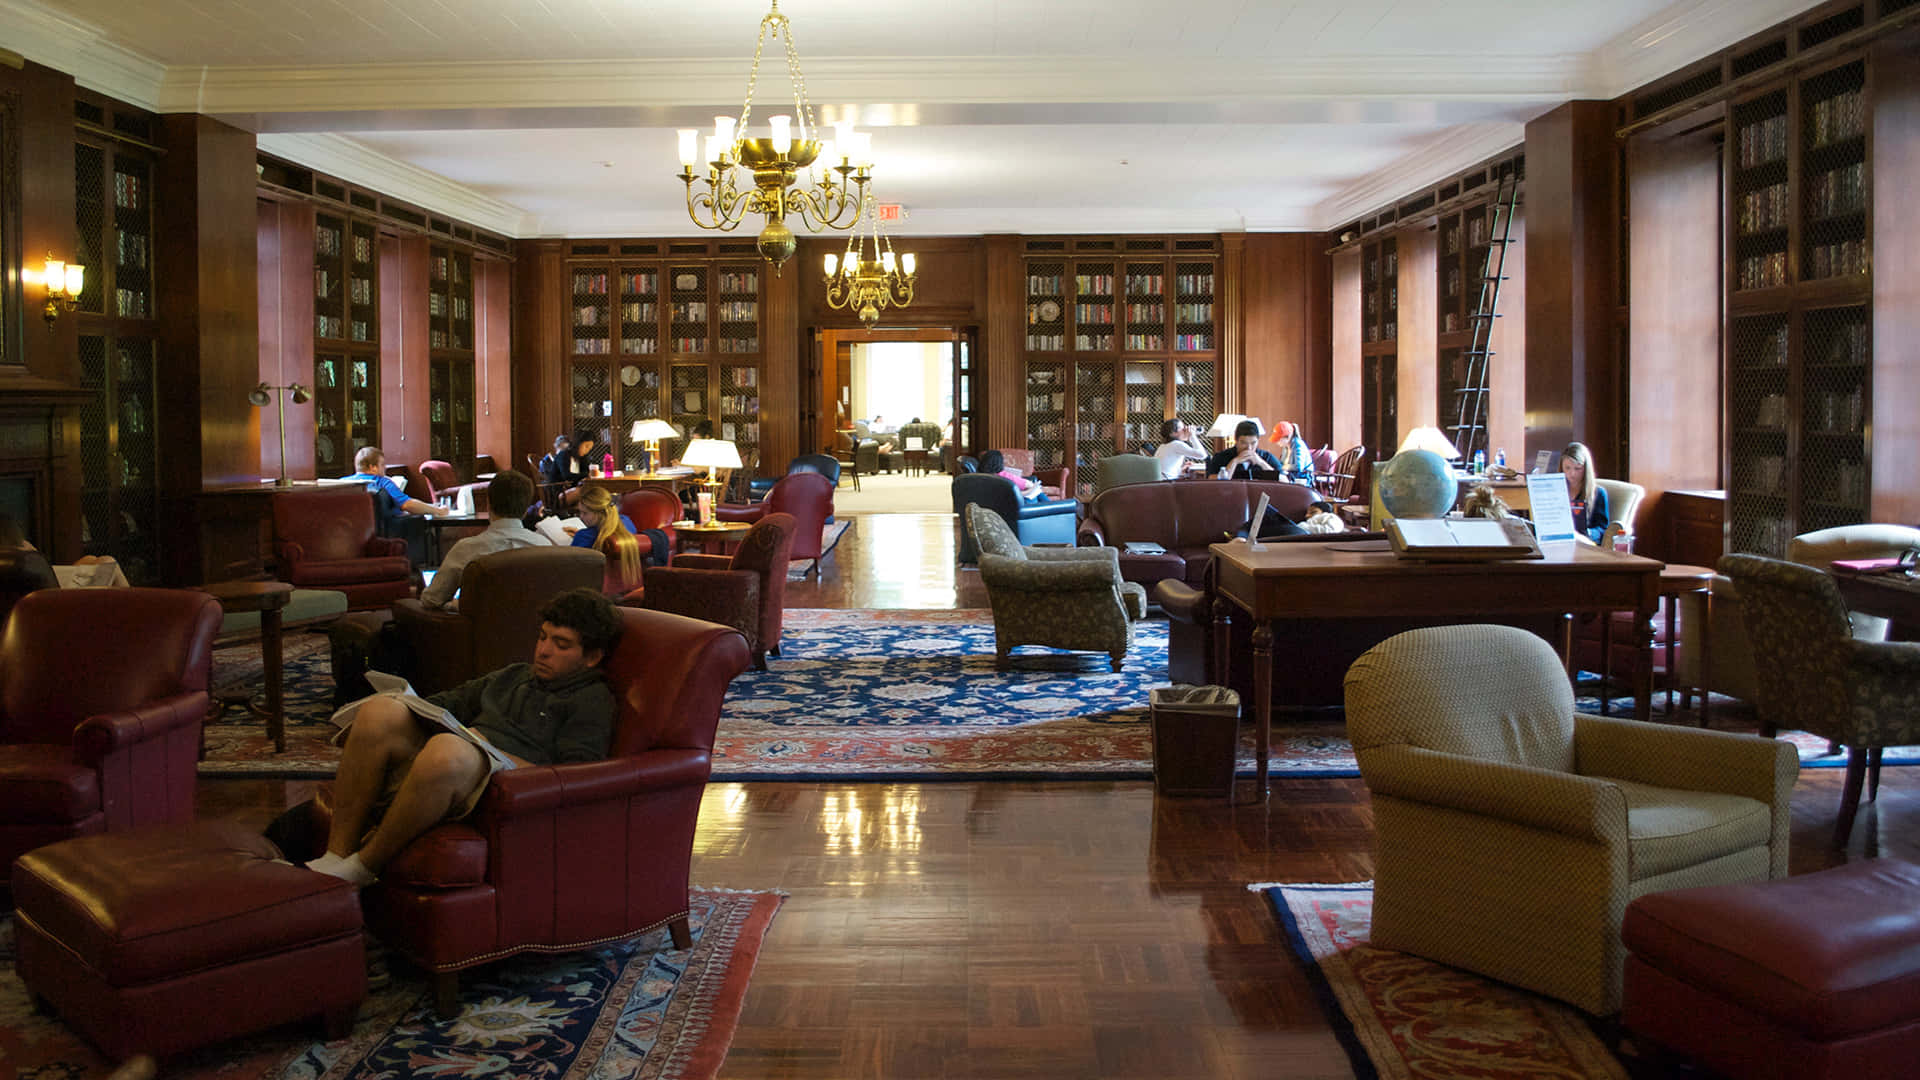 A Large Library With Many People Sitting In Chairs